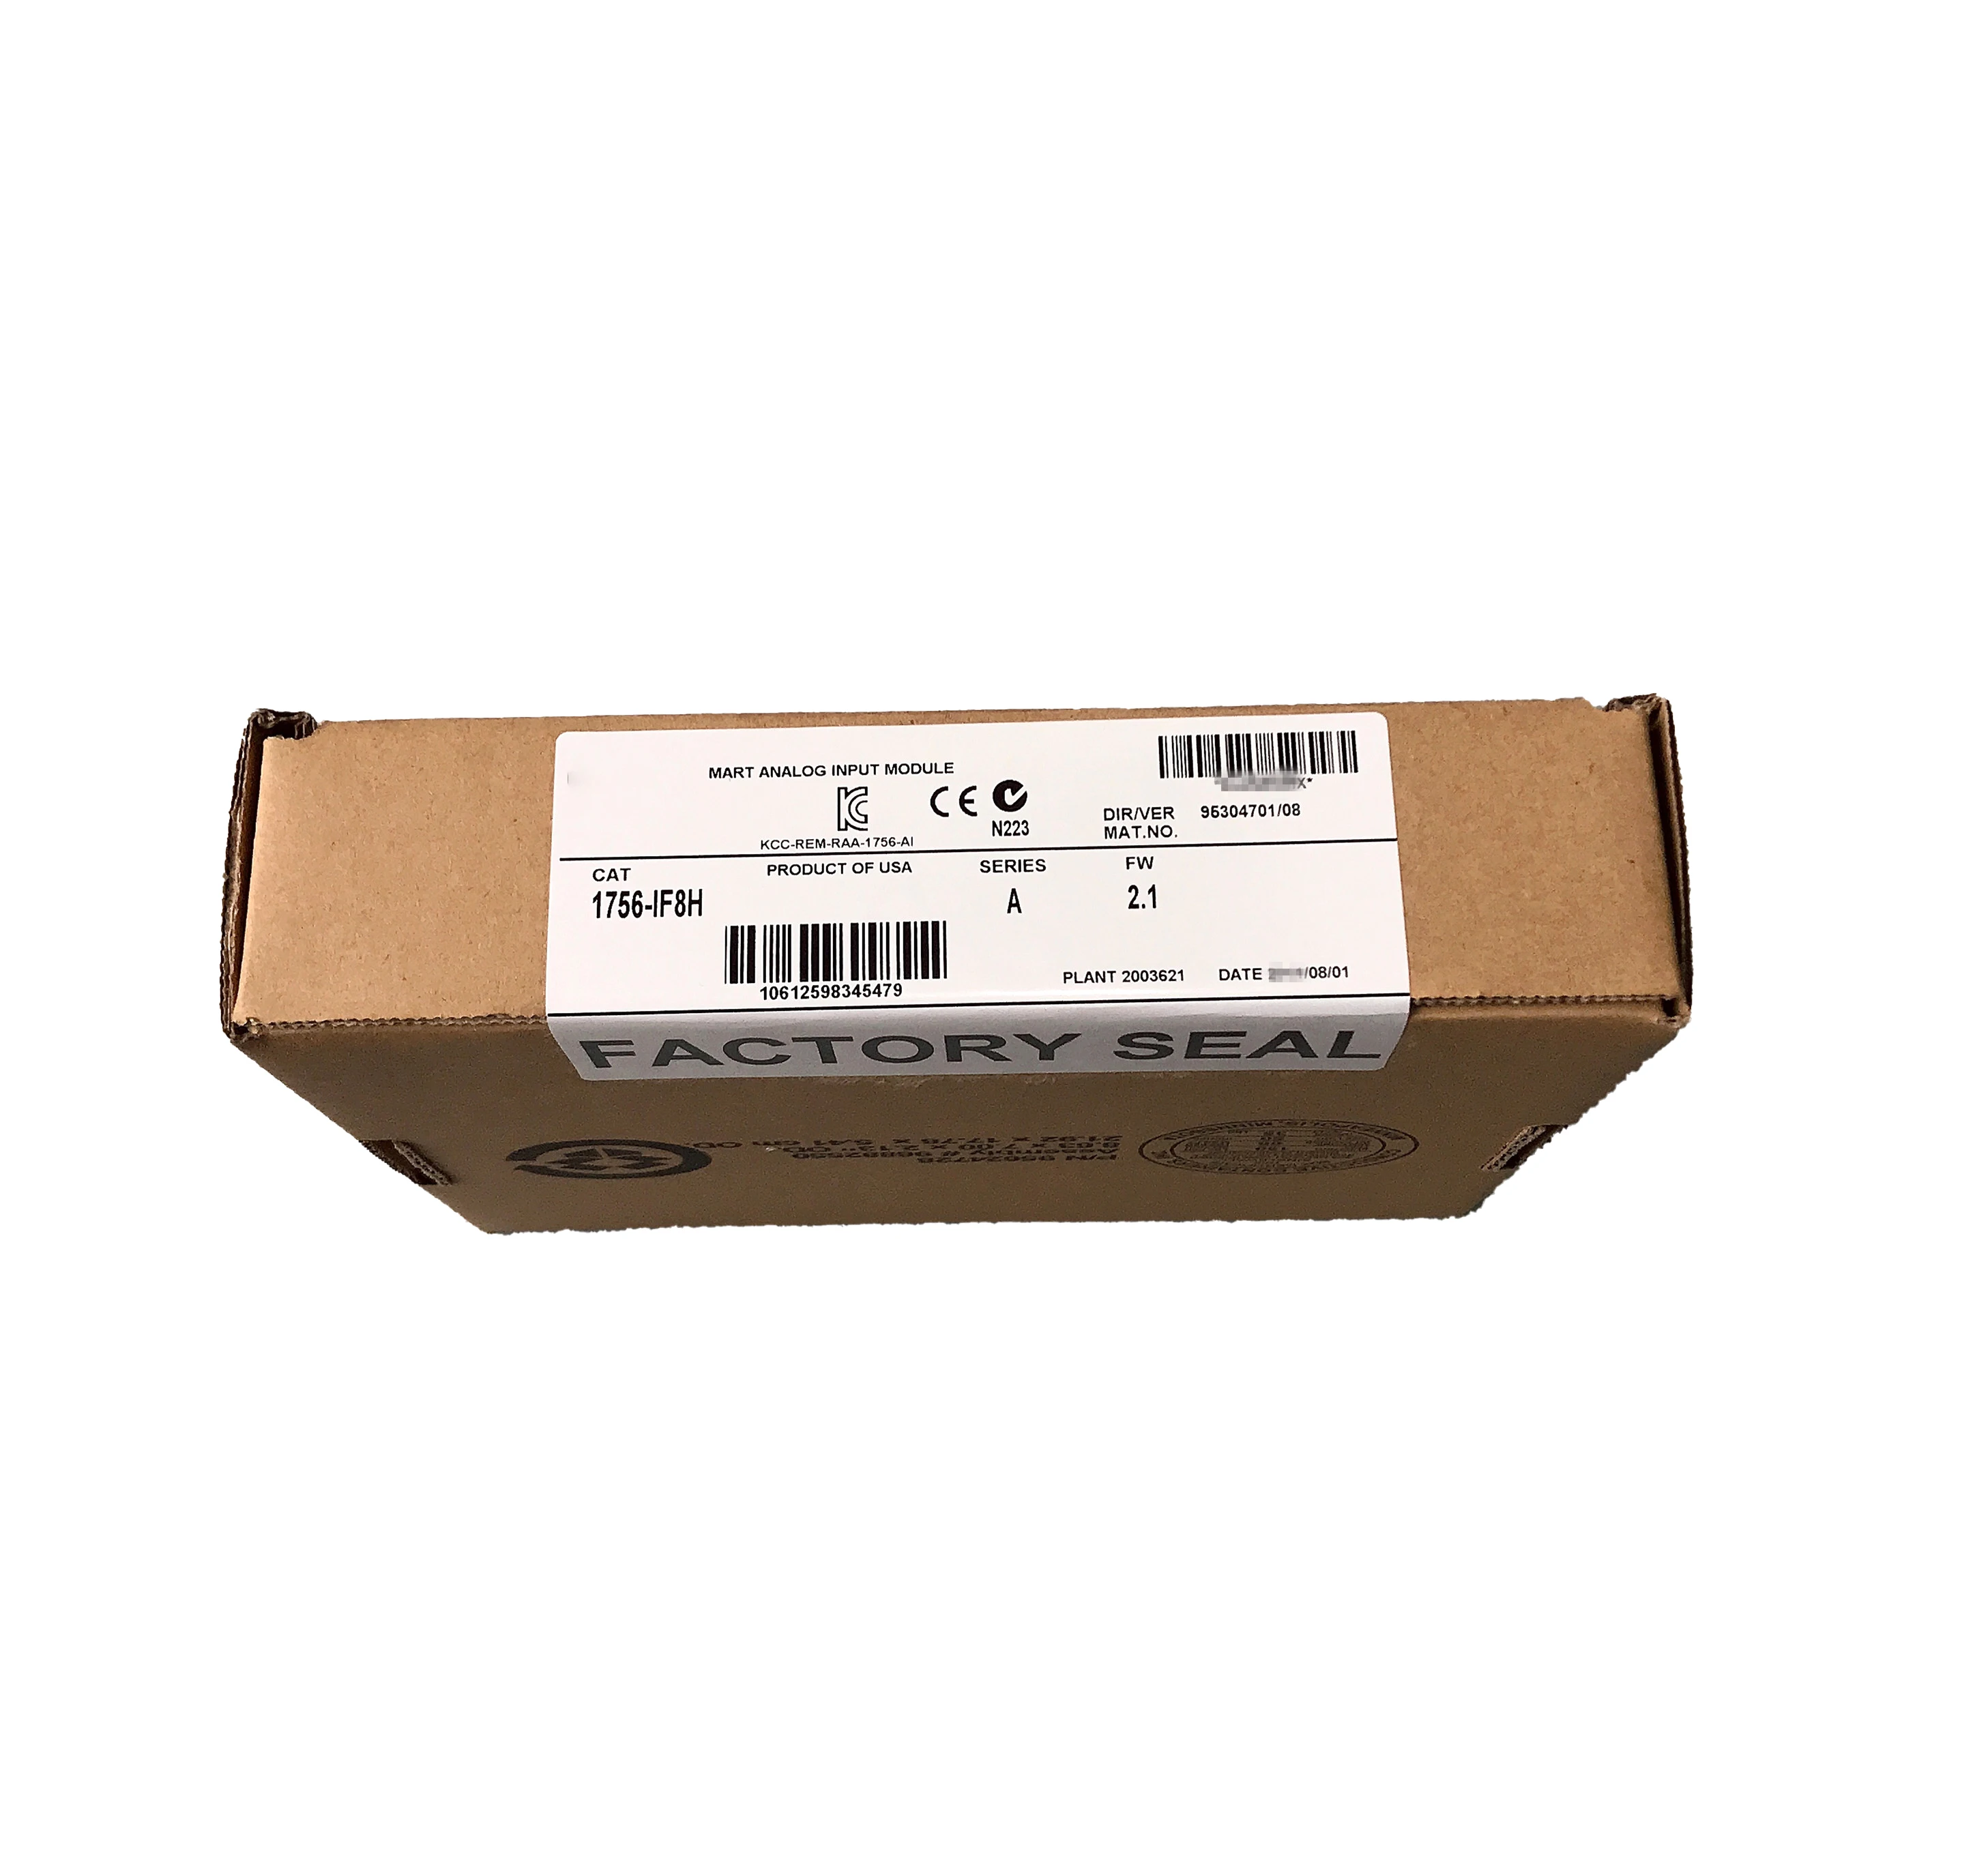 

New Original In BOX 1756-IF8H {Warehouse stock} 1 Year Warranty Shipment within 24 hours